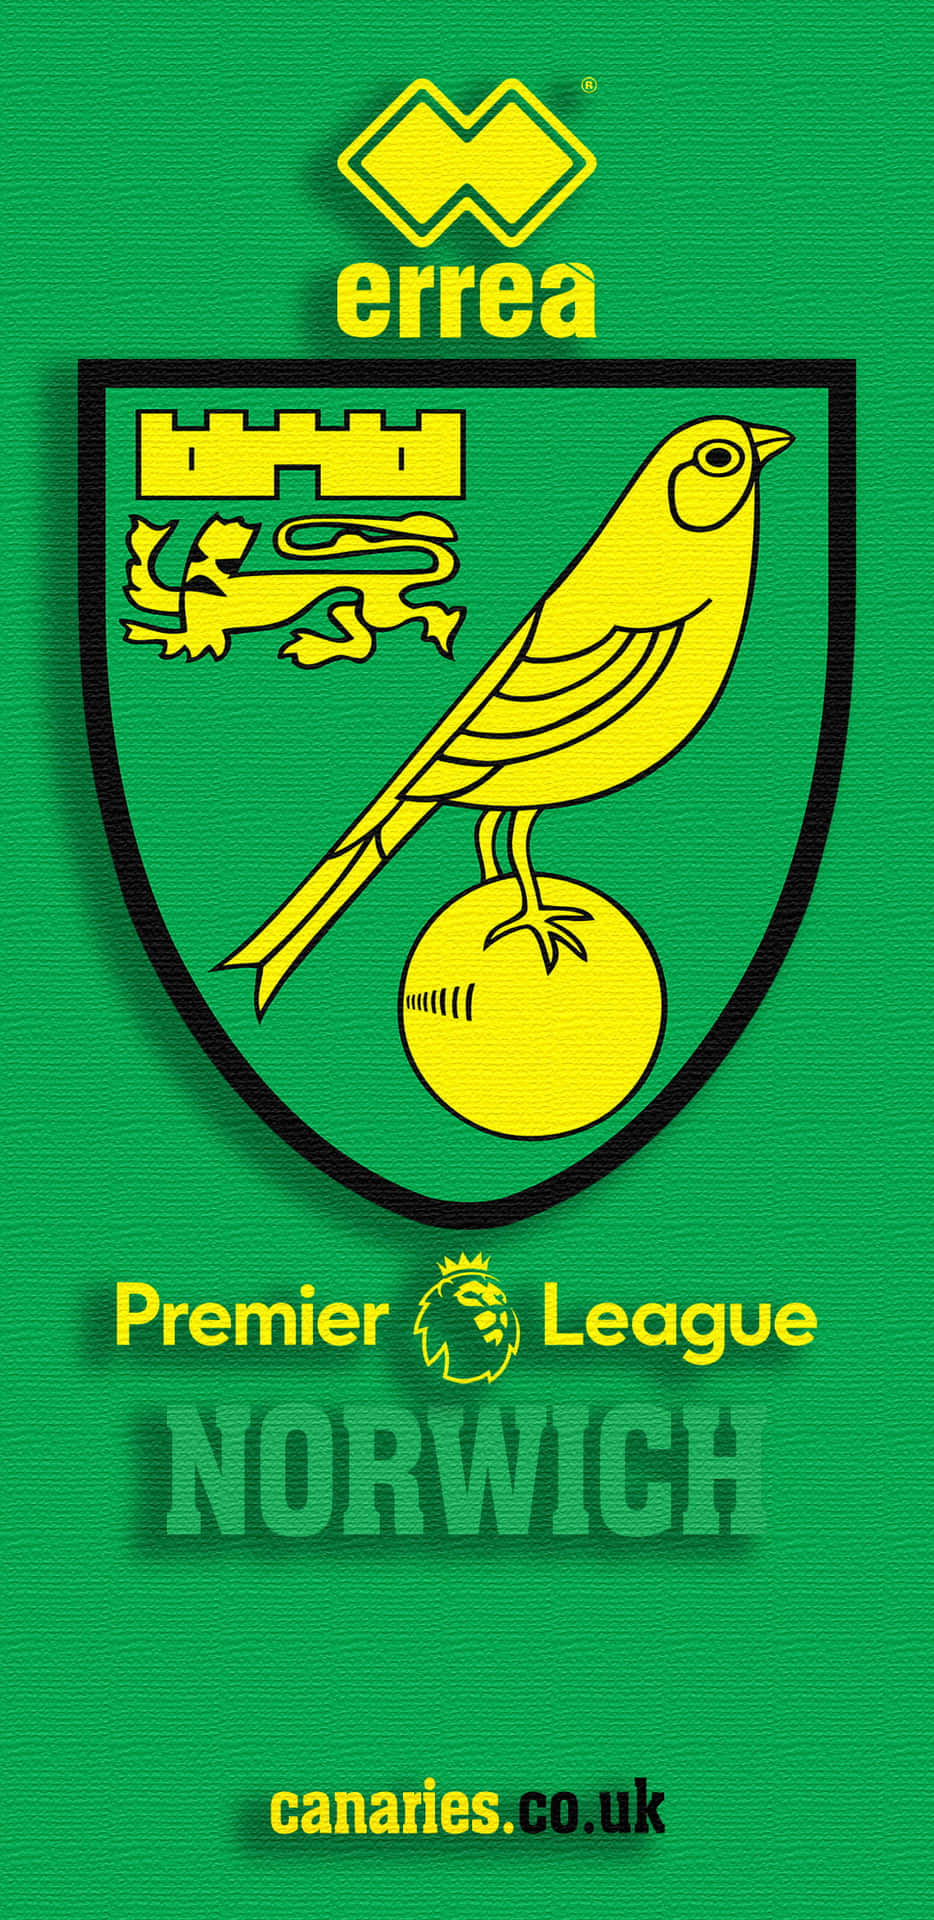 "a Radiant Day At Carrow Road, Norwich City Football Club's Home Ground" Wallpaper